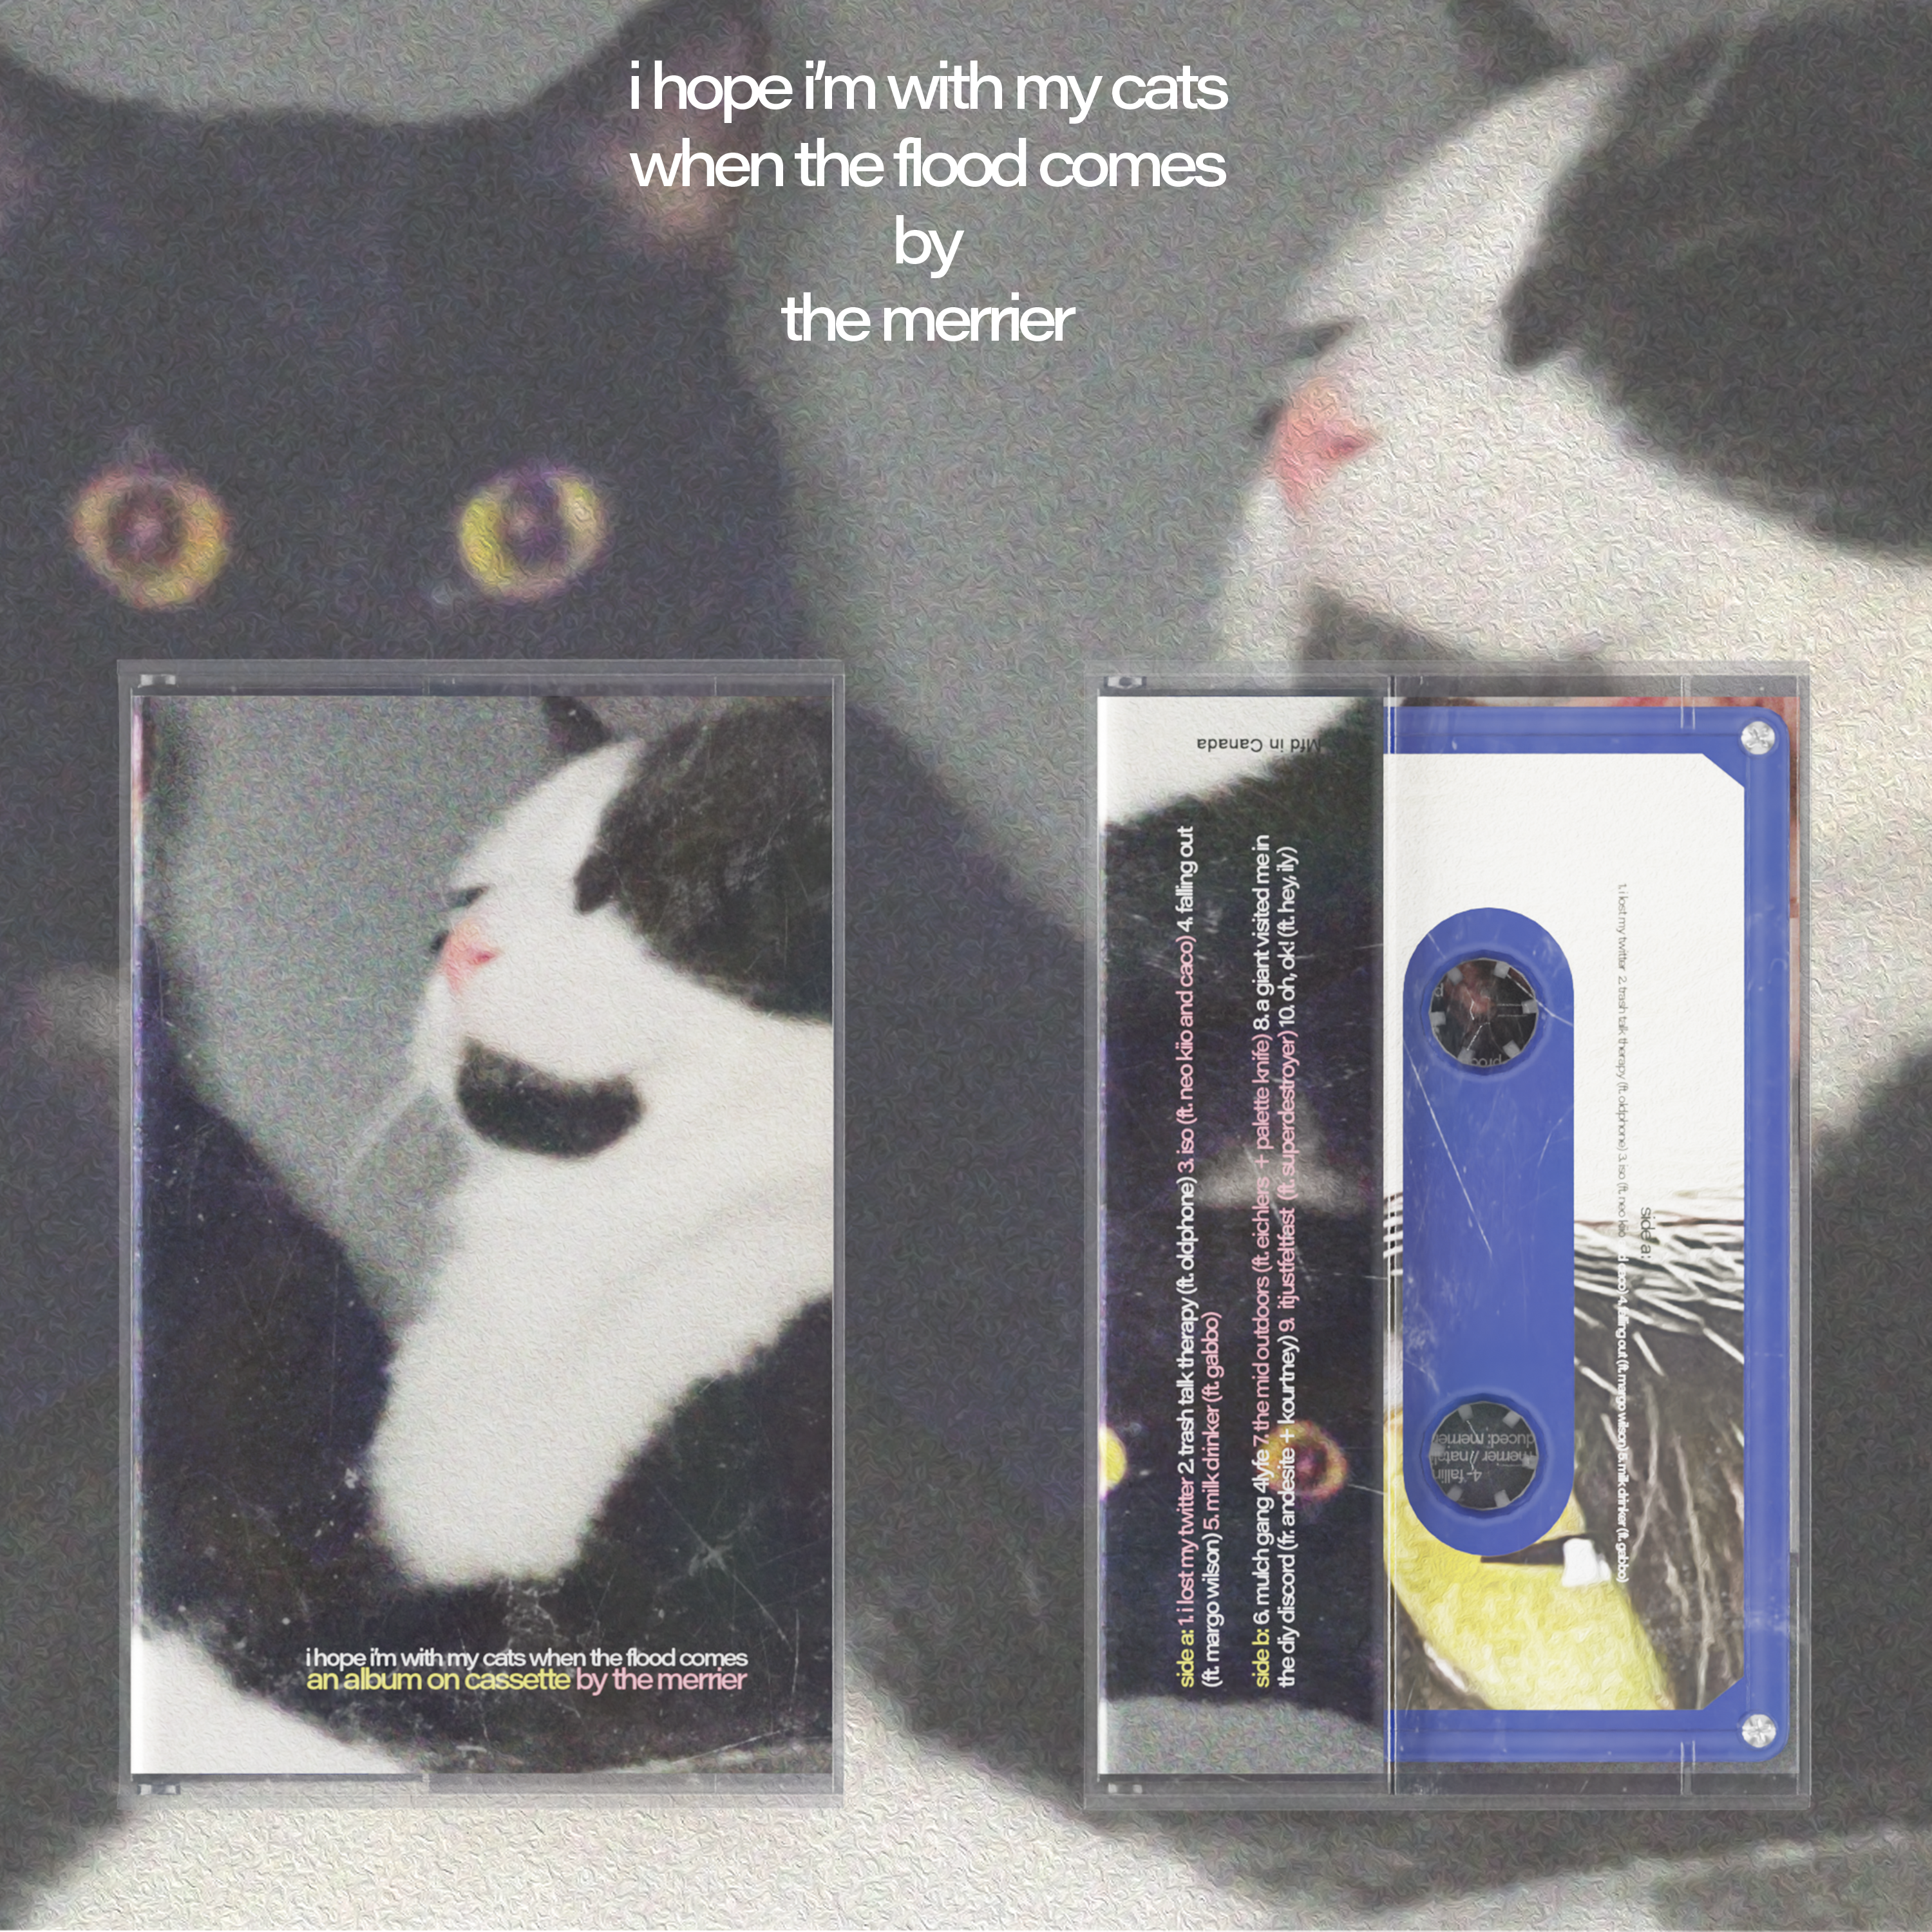 The Merrier - i hope i'm with my cats when the flood comes Cassette (Pre-Order)